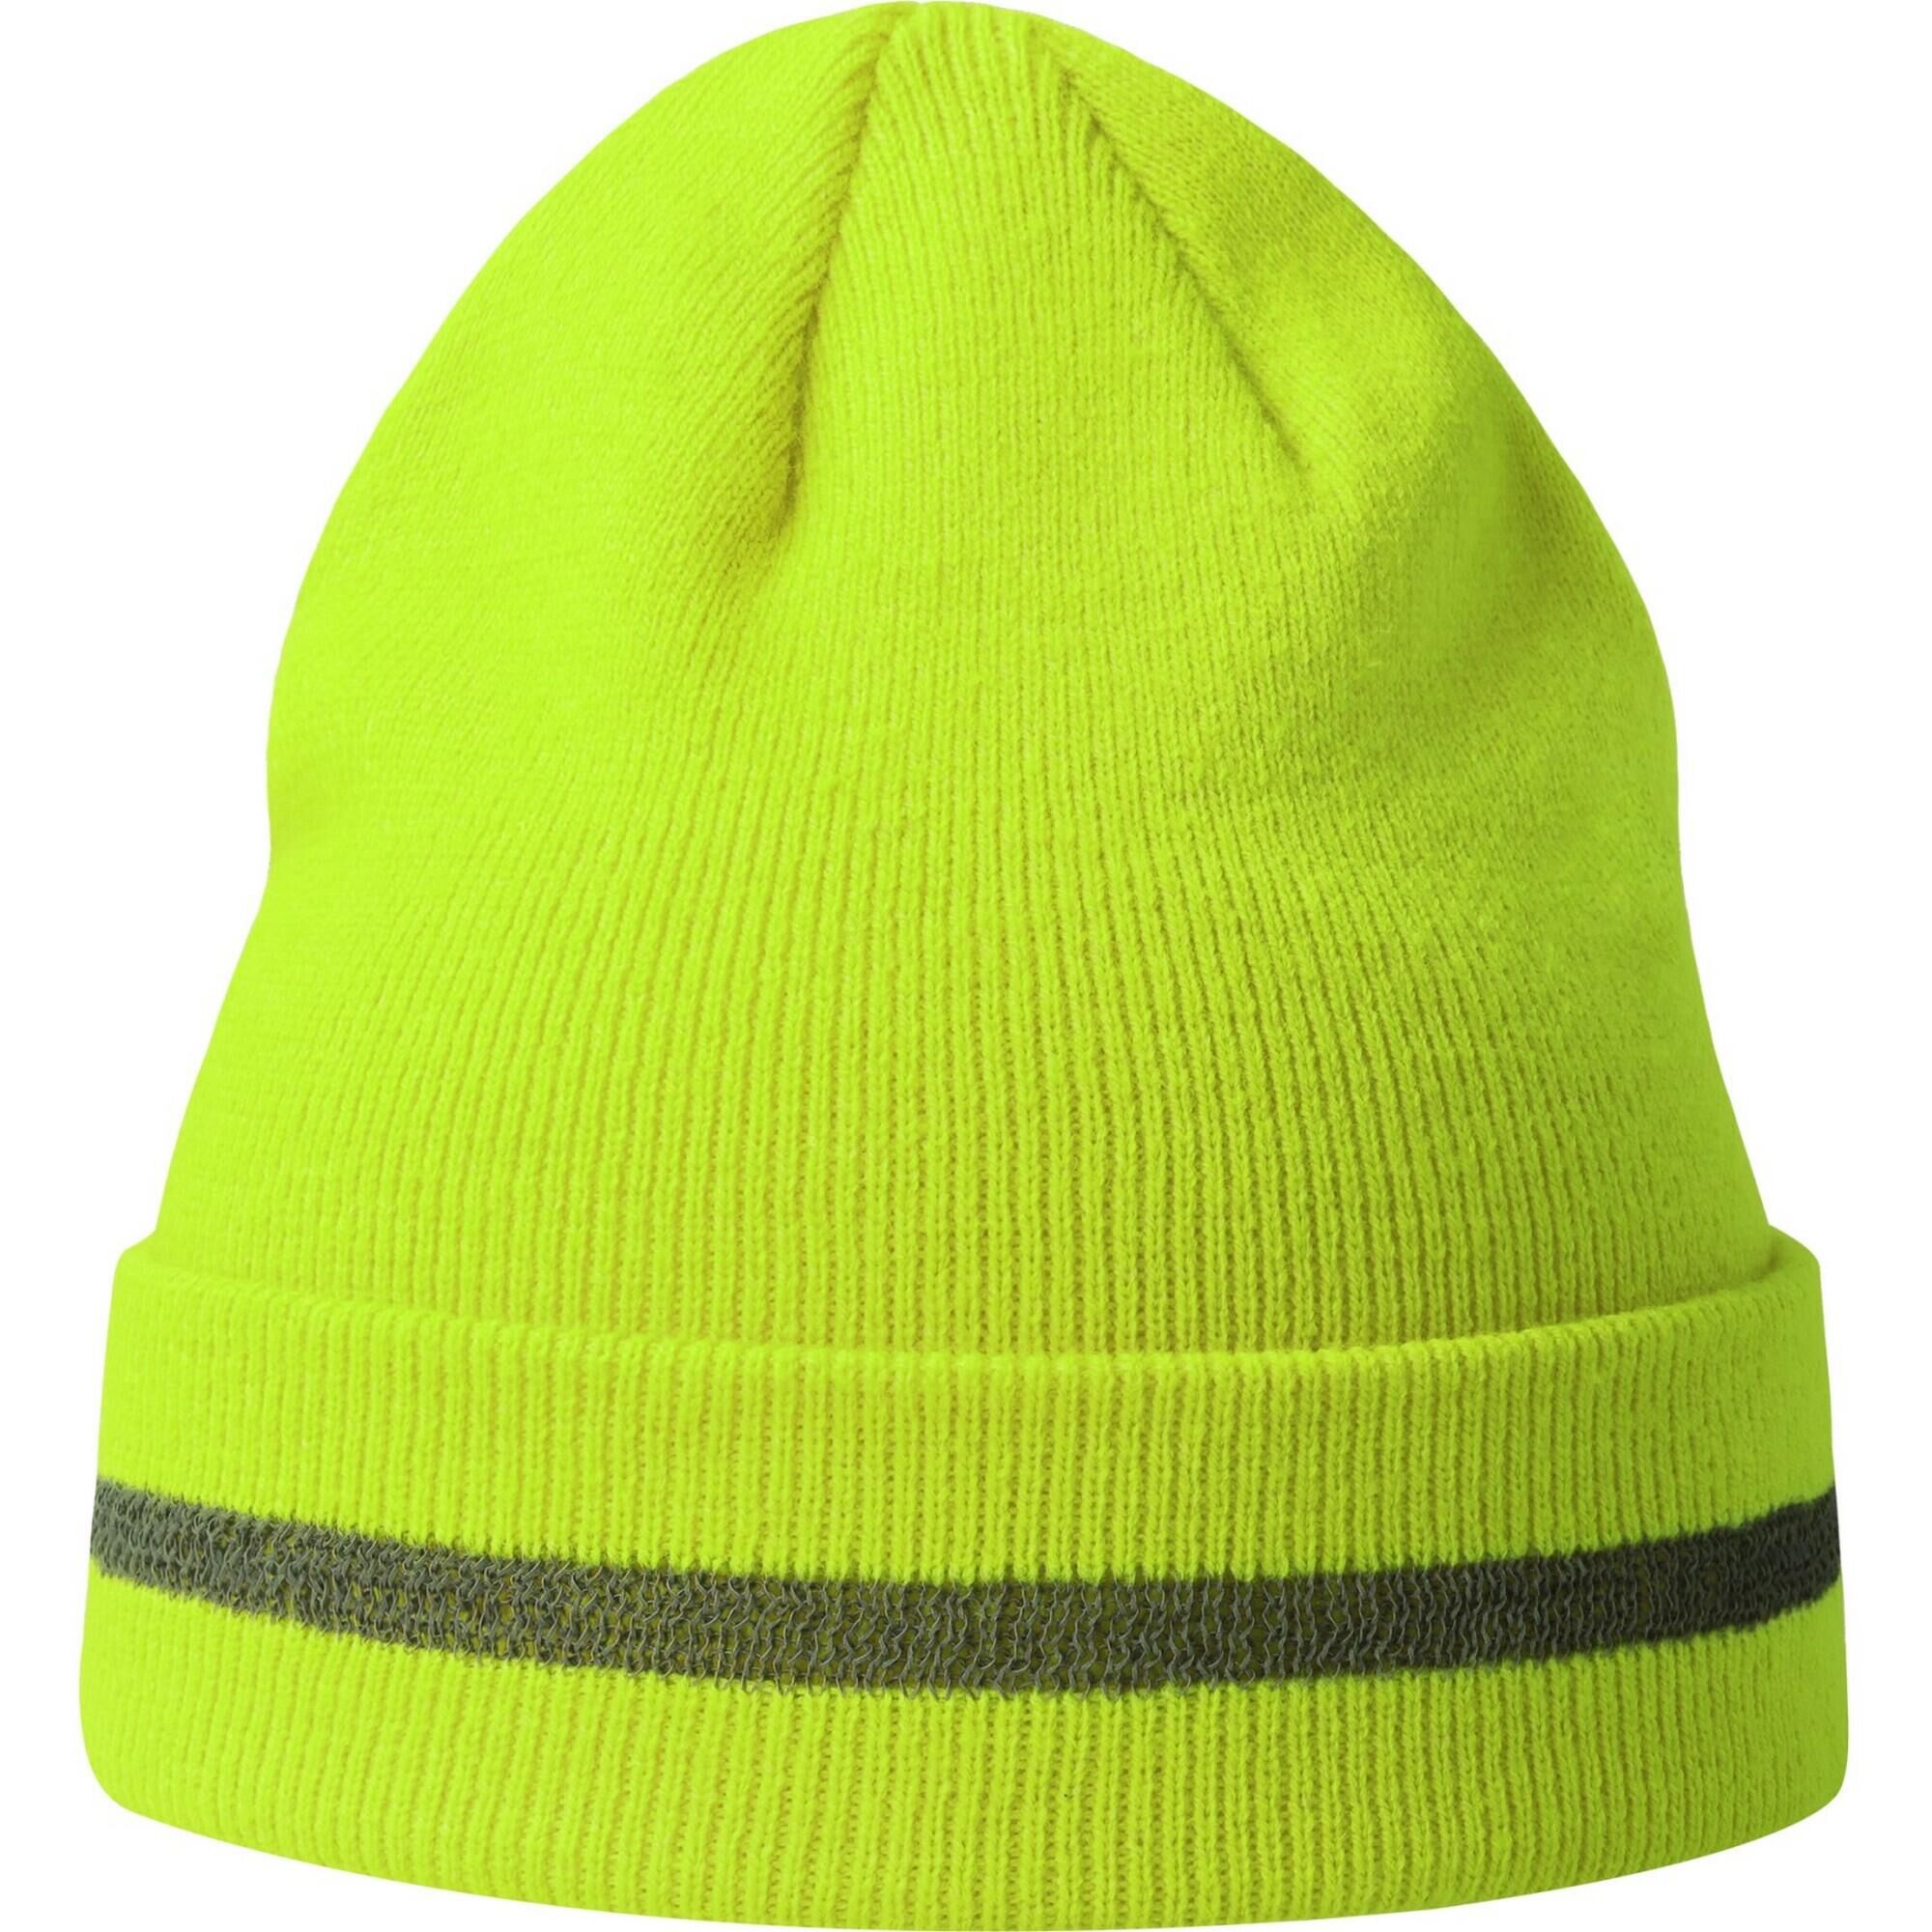 ATLANTIS Unisex Adult Workout Recycled HiVis Beanie (Safety Yellow)